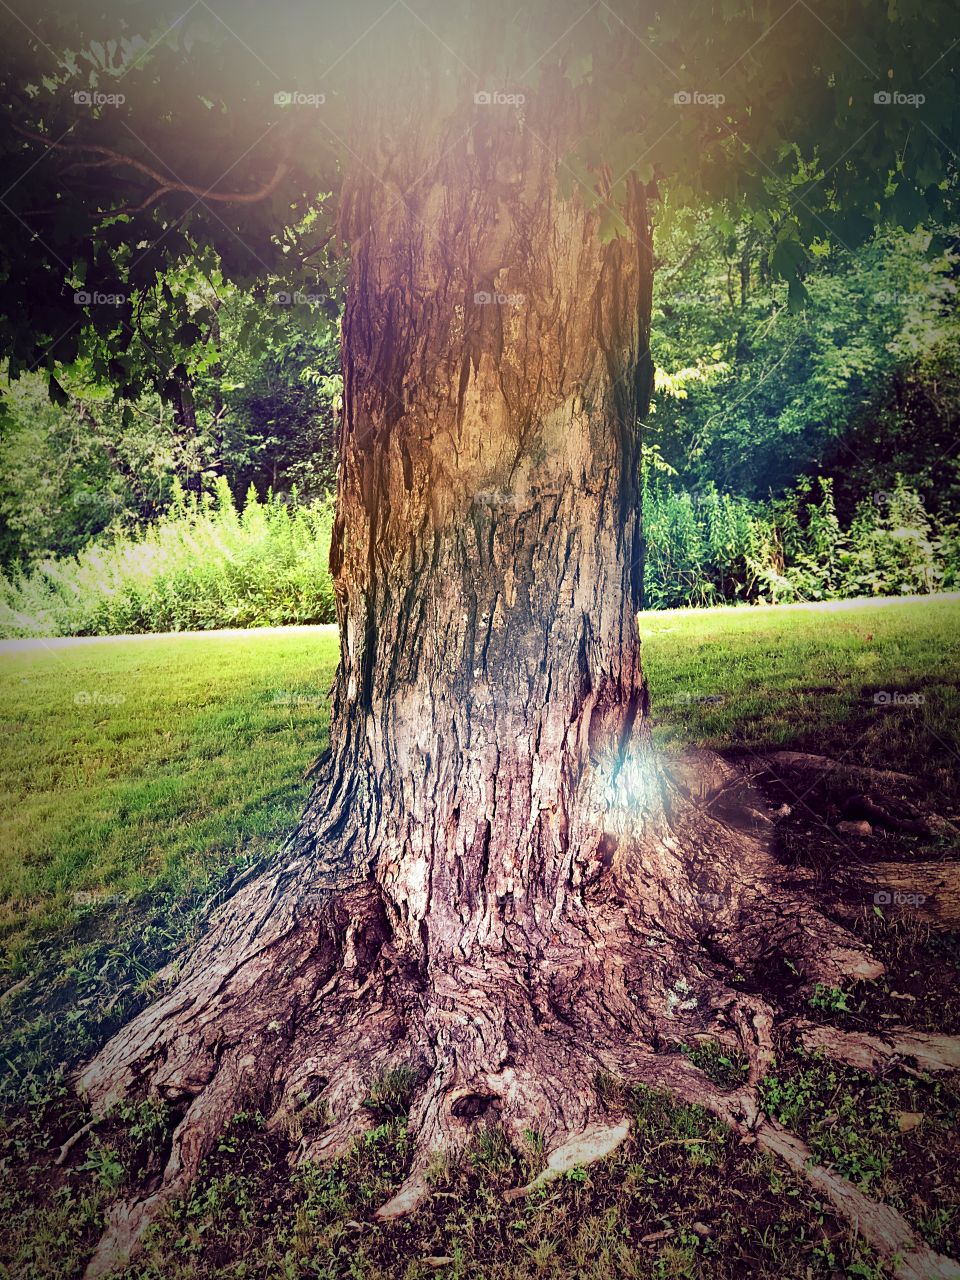 A sturdy trunk that has been here before I existed and even before then. Strong, rooted, brave. I want to be this trunk.